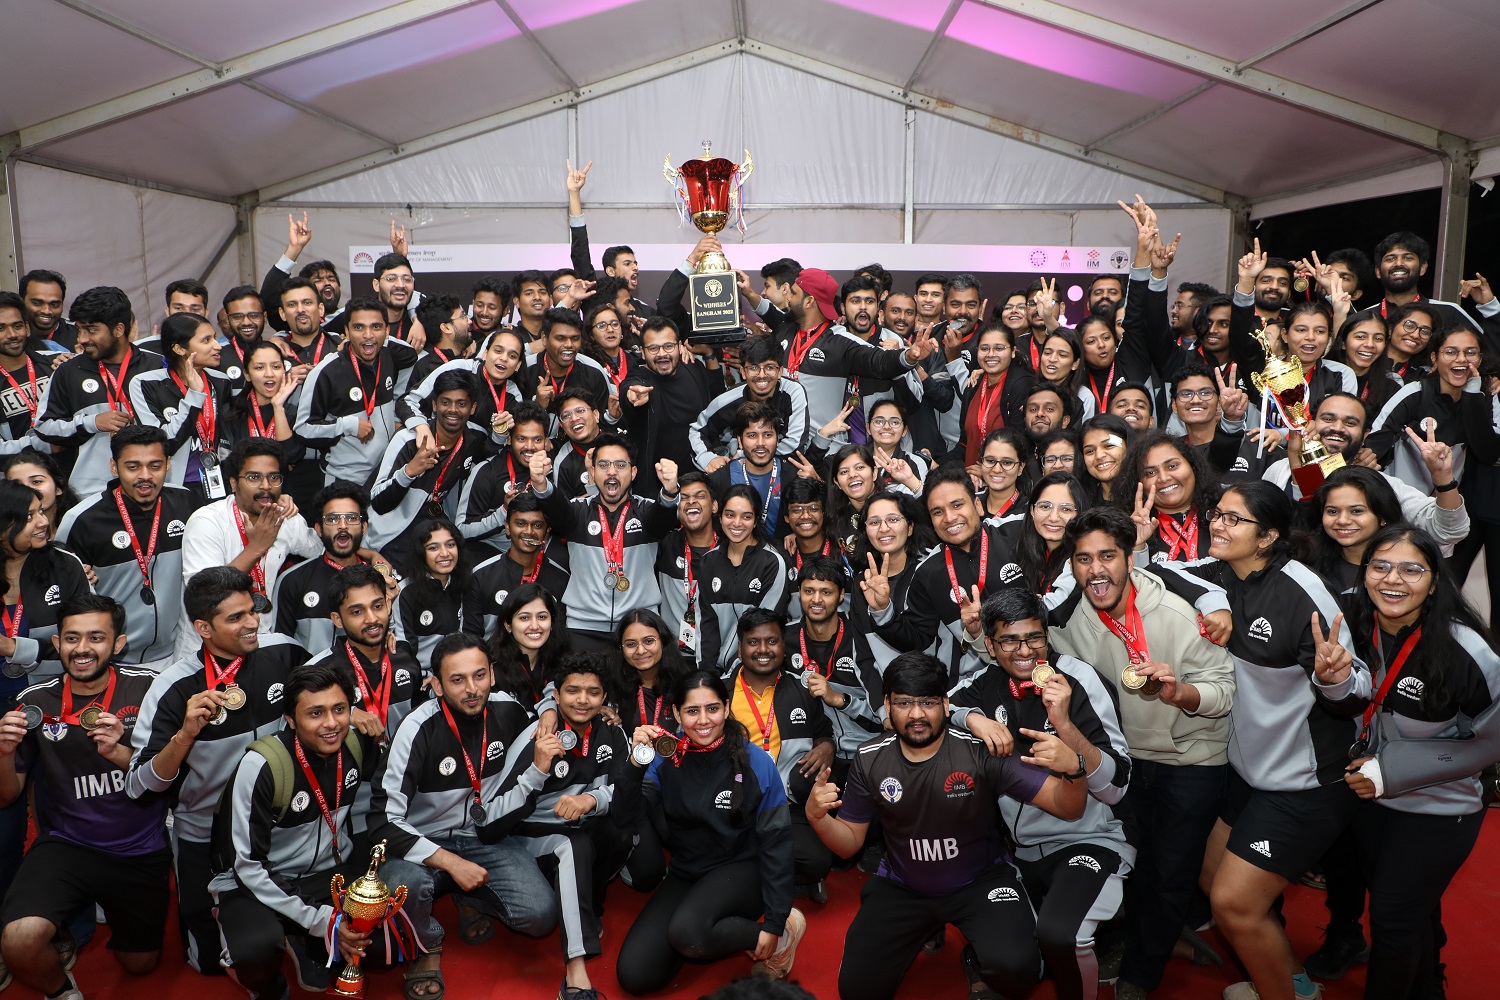 IIM Bangalore participants with the Championship Trophy of Sangram 2022 on November 20, 2022.